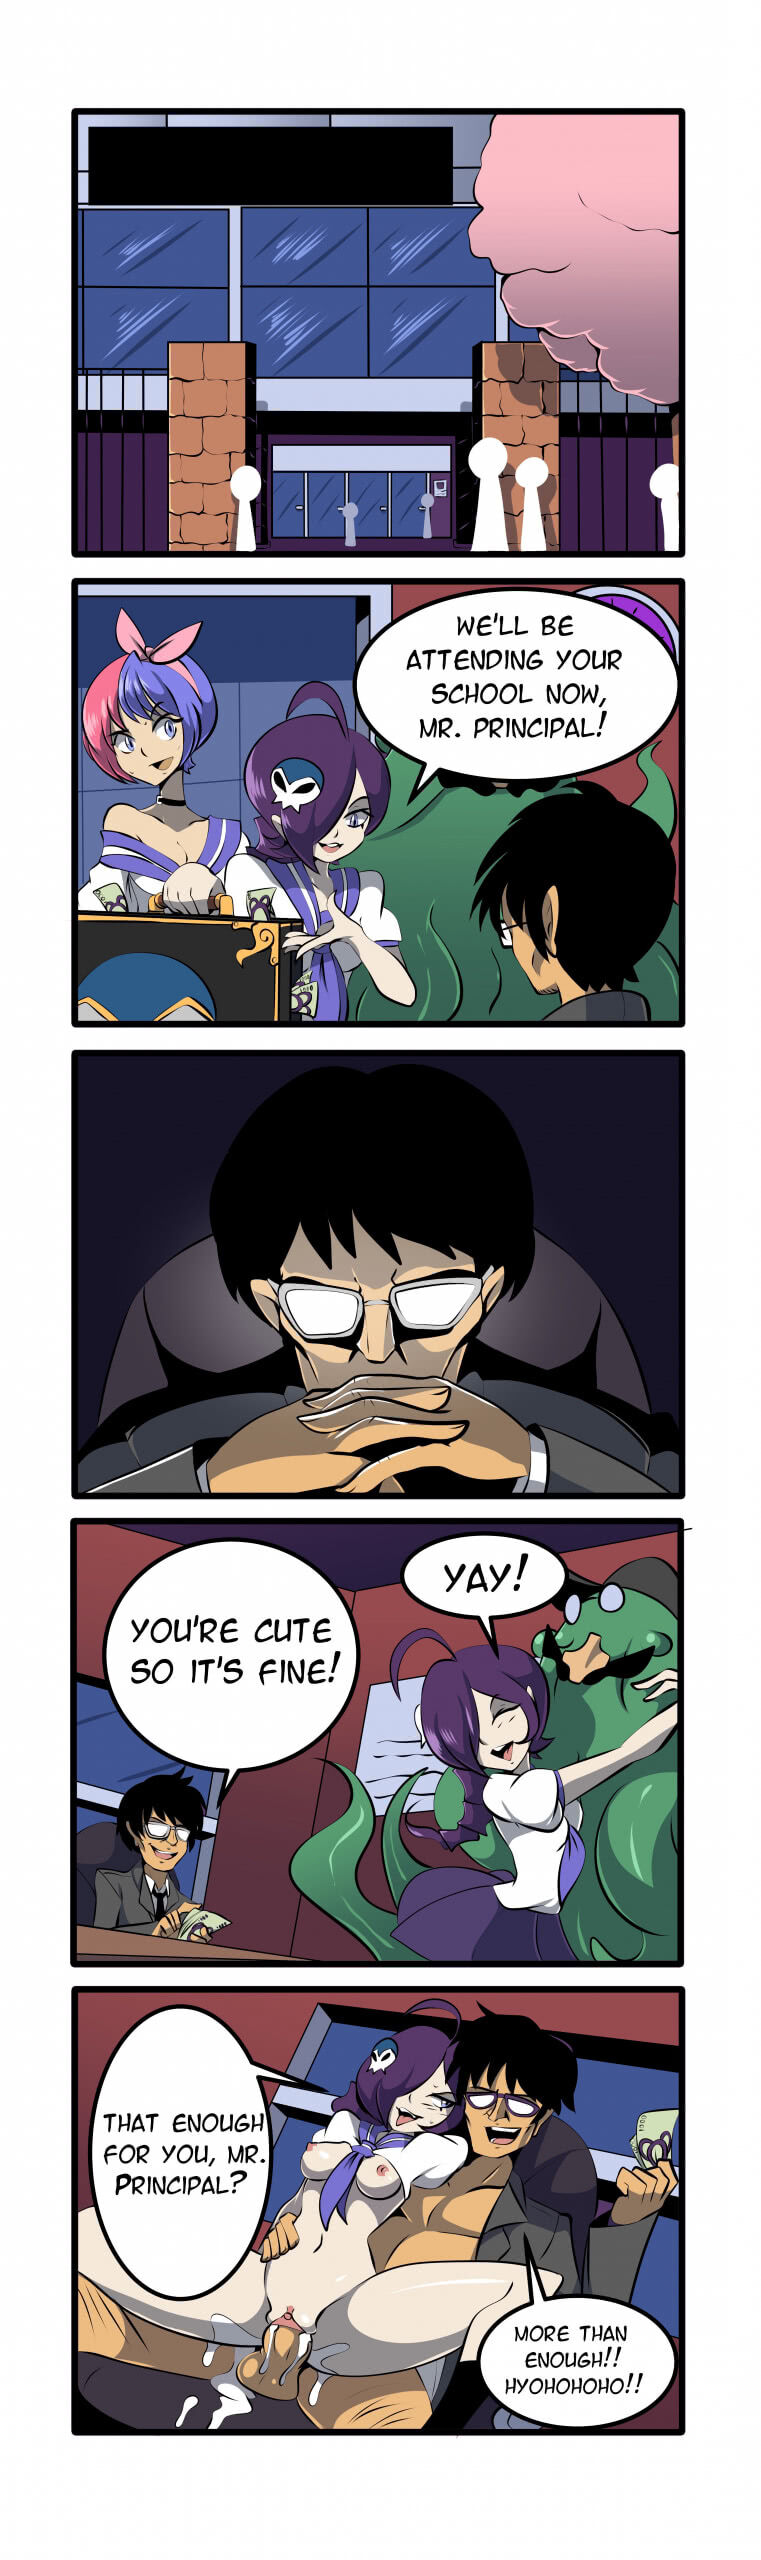 Zone-Tan Adventures - Page 4